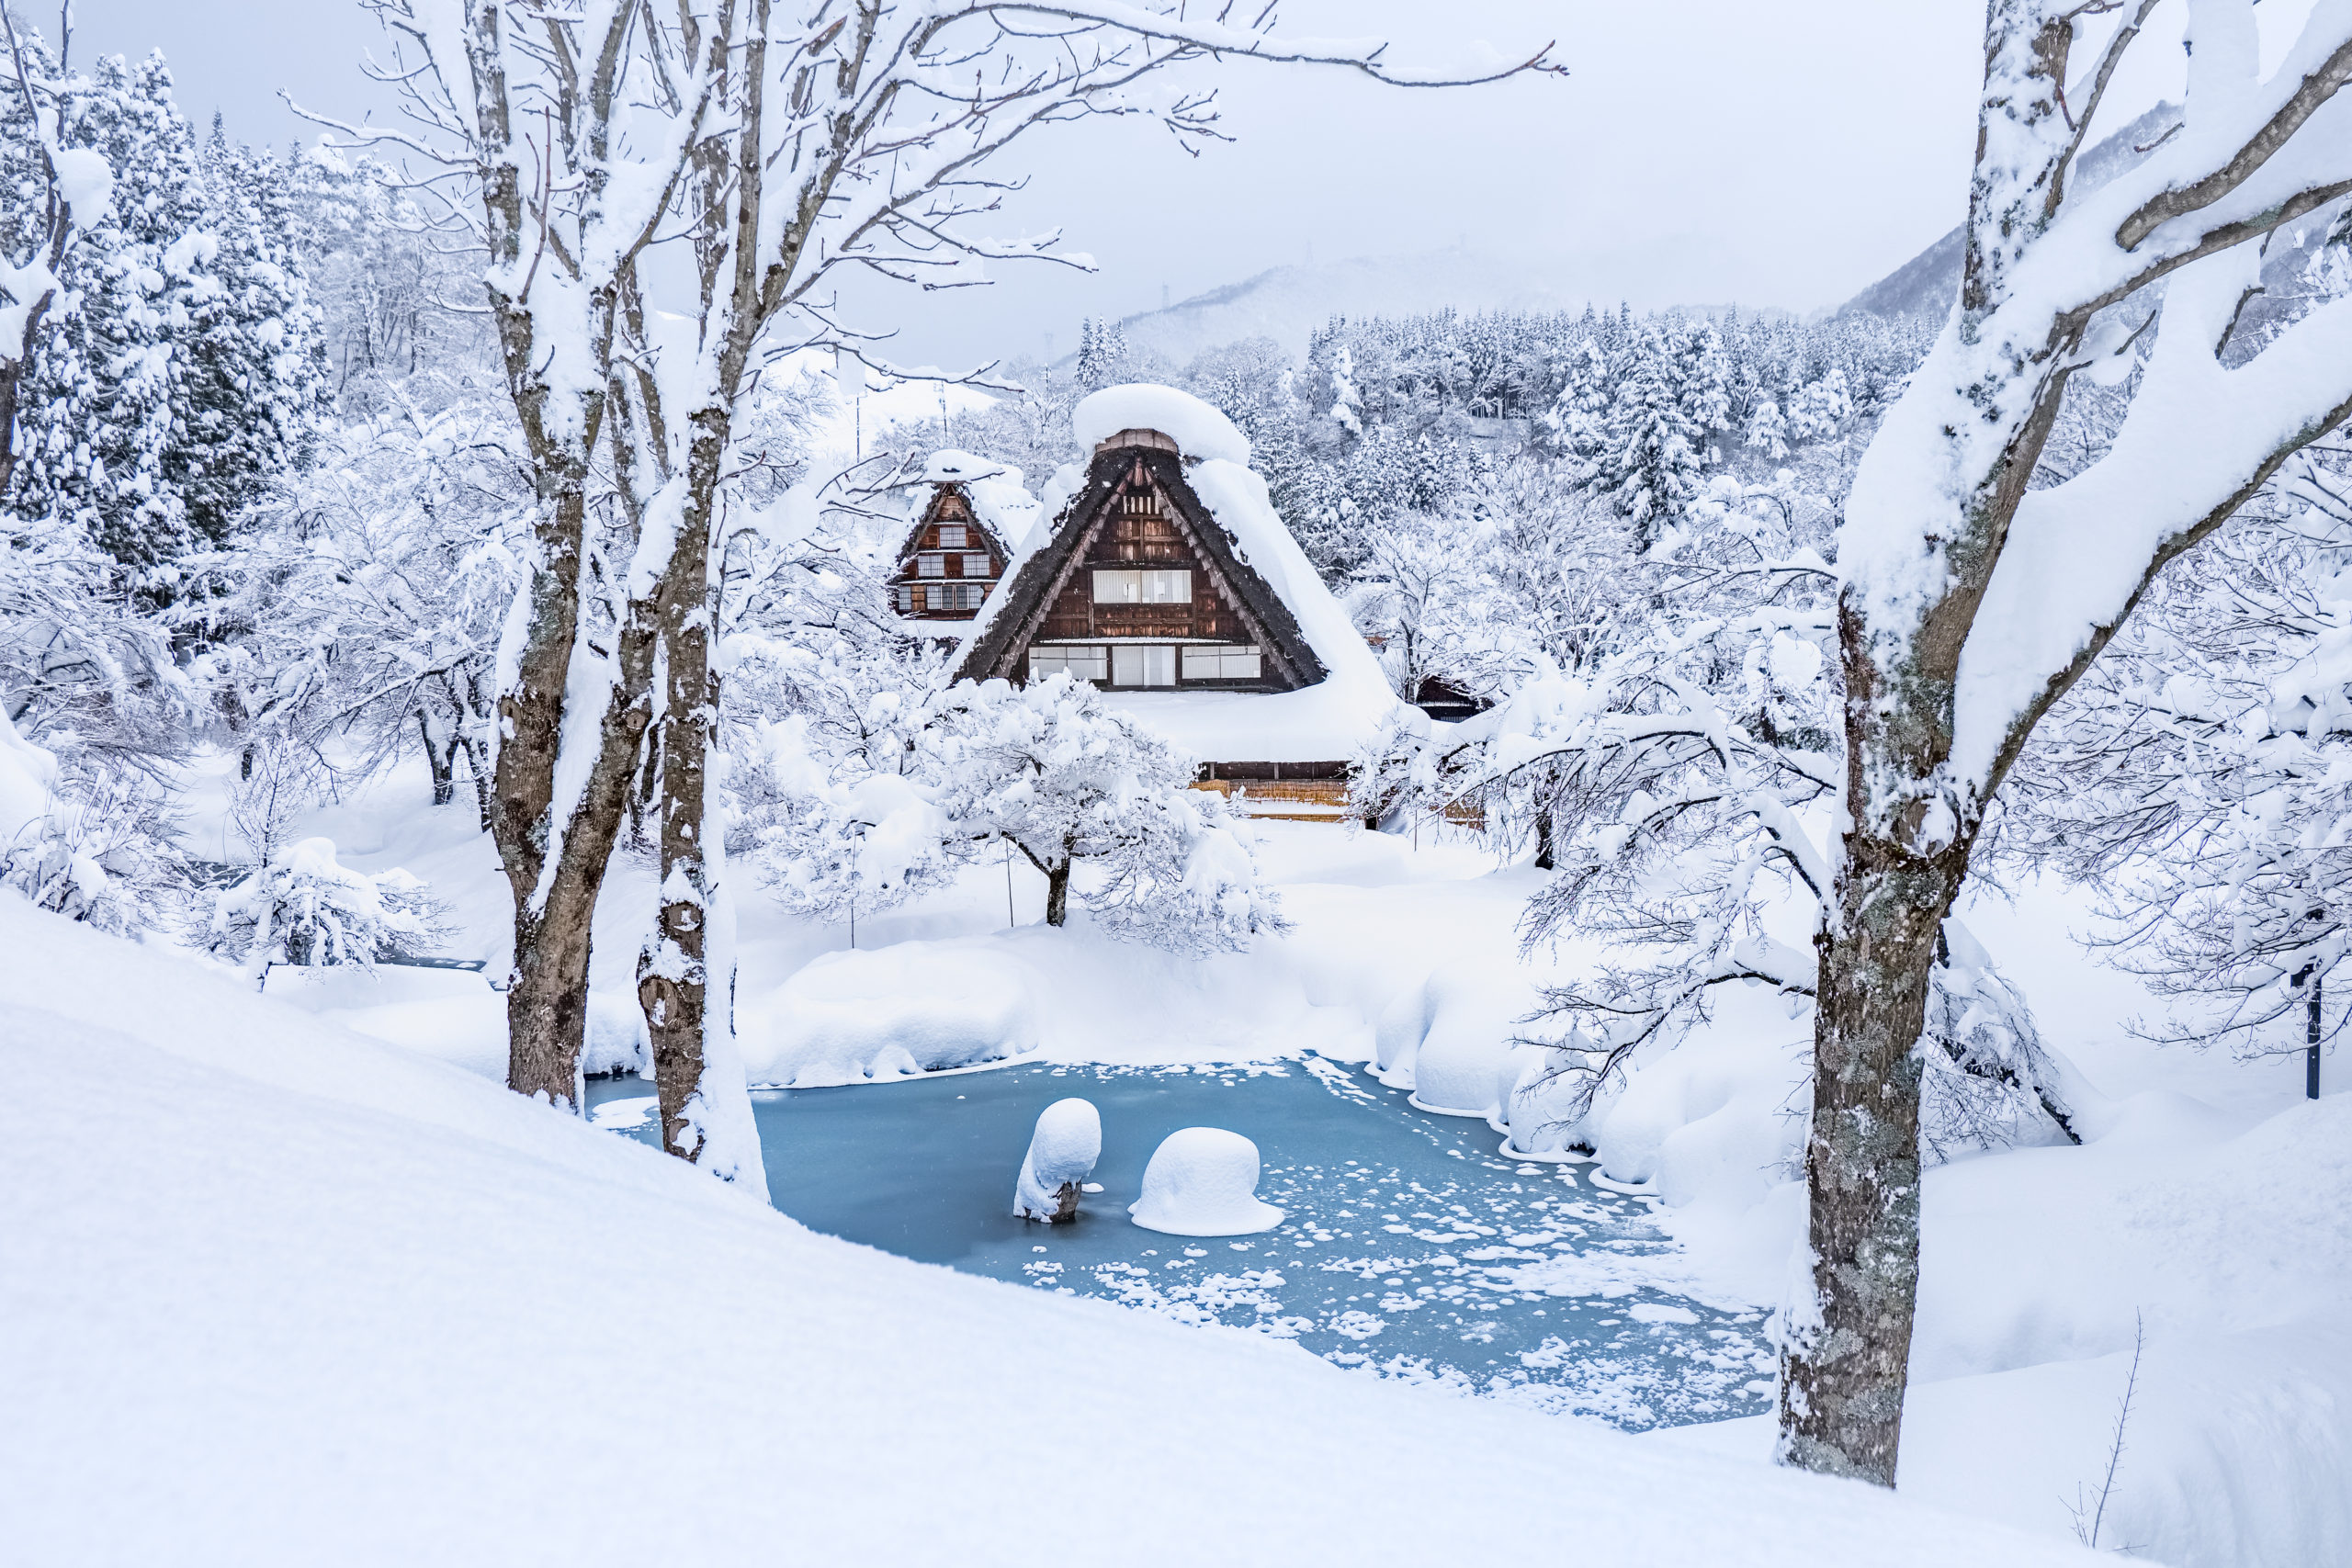 best place to visit japan during winter